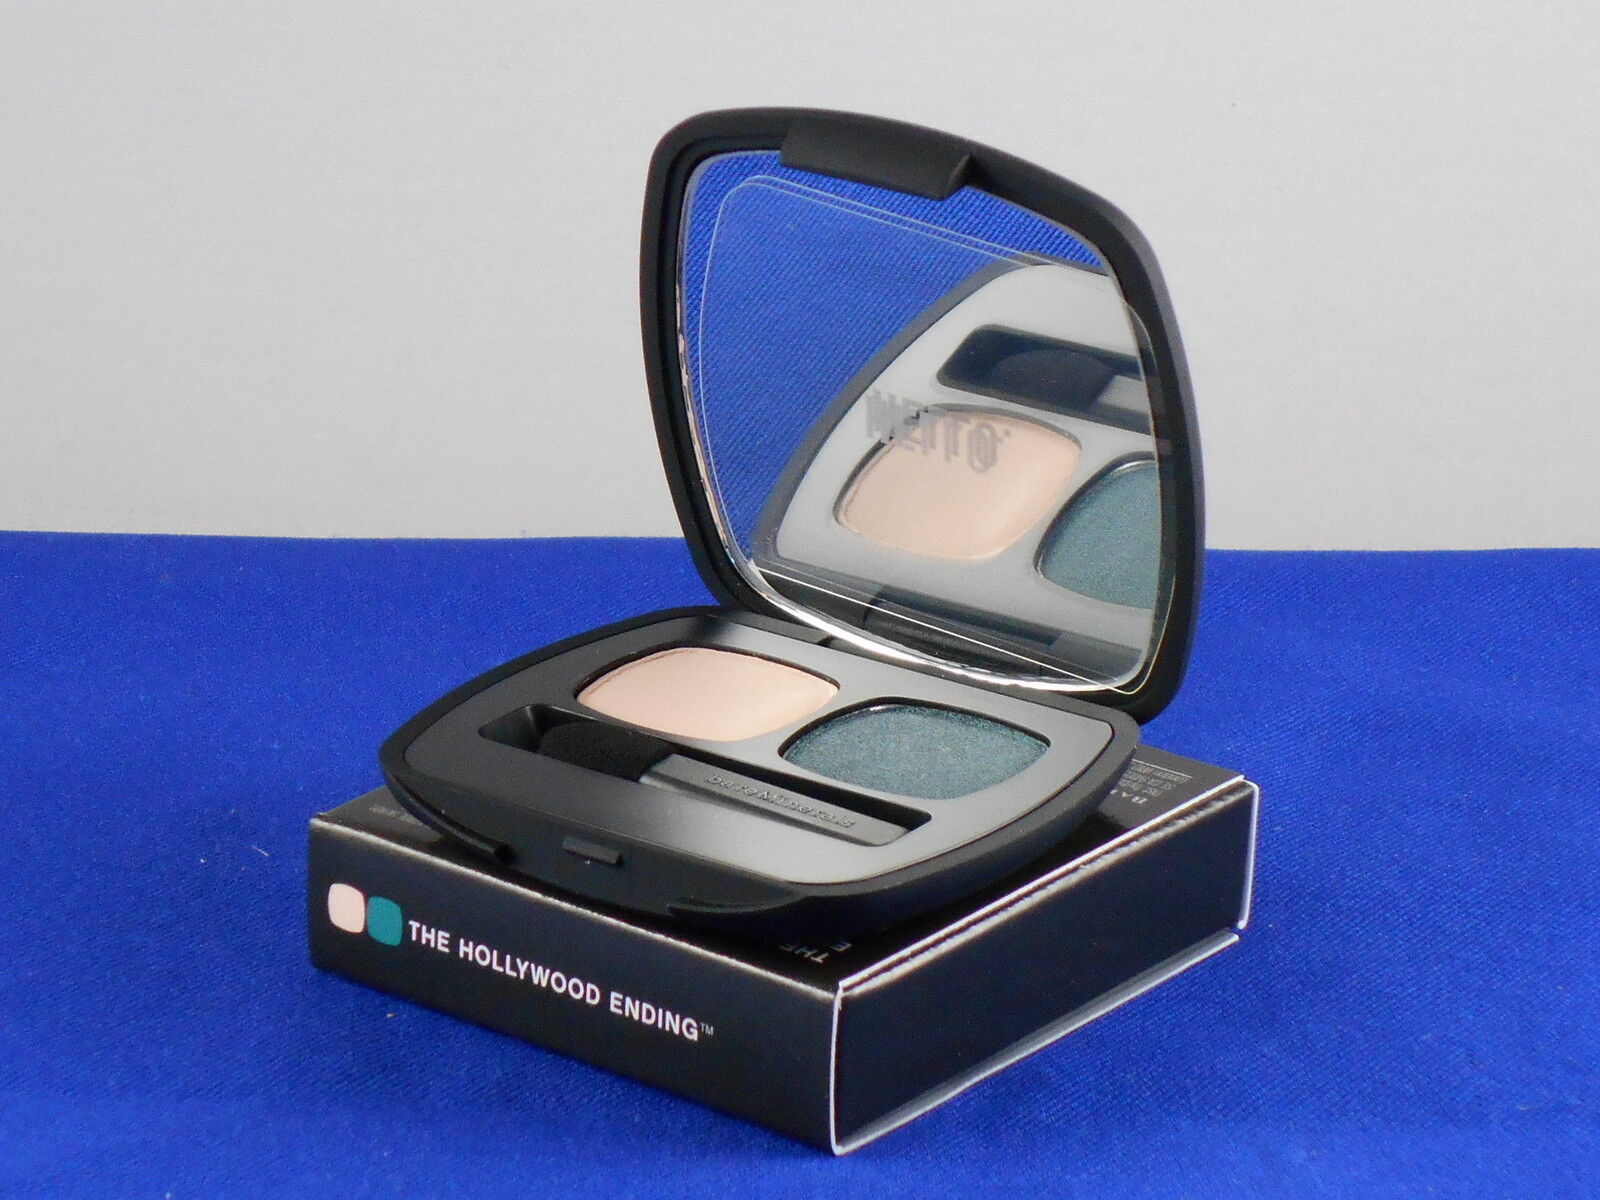 bareMinerals Weekly update THE HOLLYWOOD ENDING Ready PROMISE DA 2.0 Max 77% OFF Eyeshadow